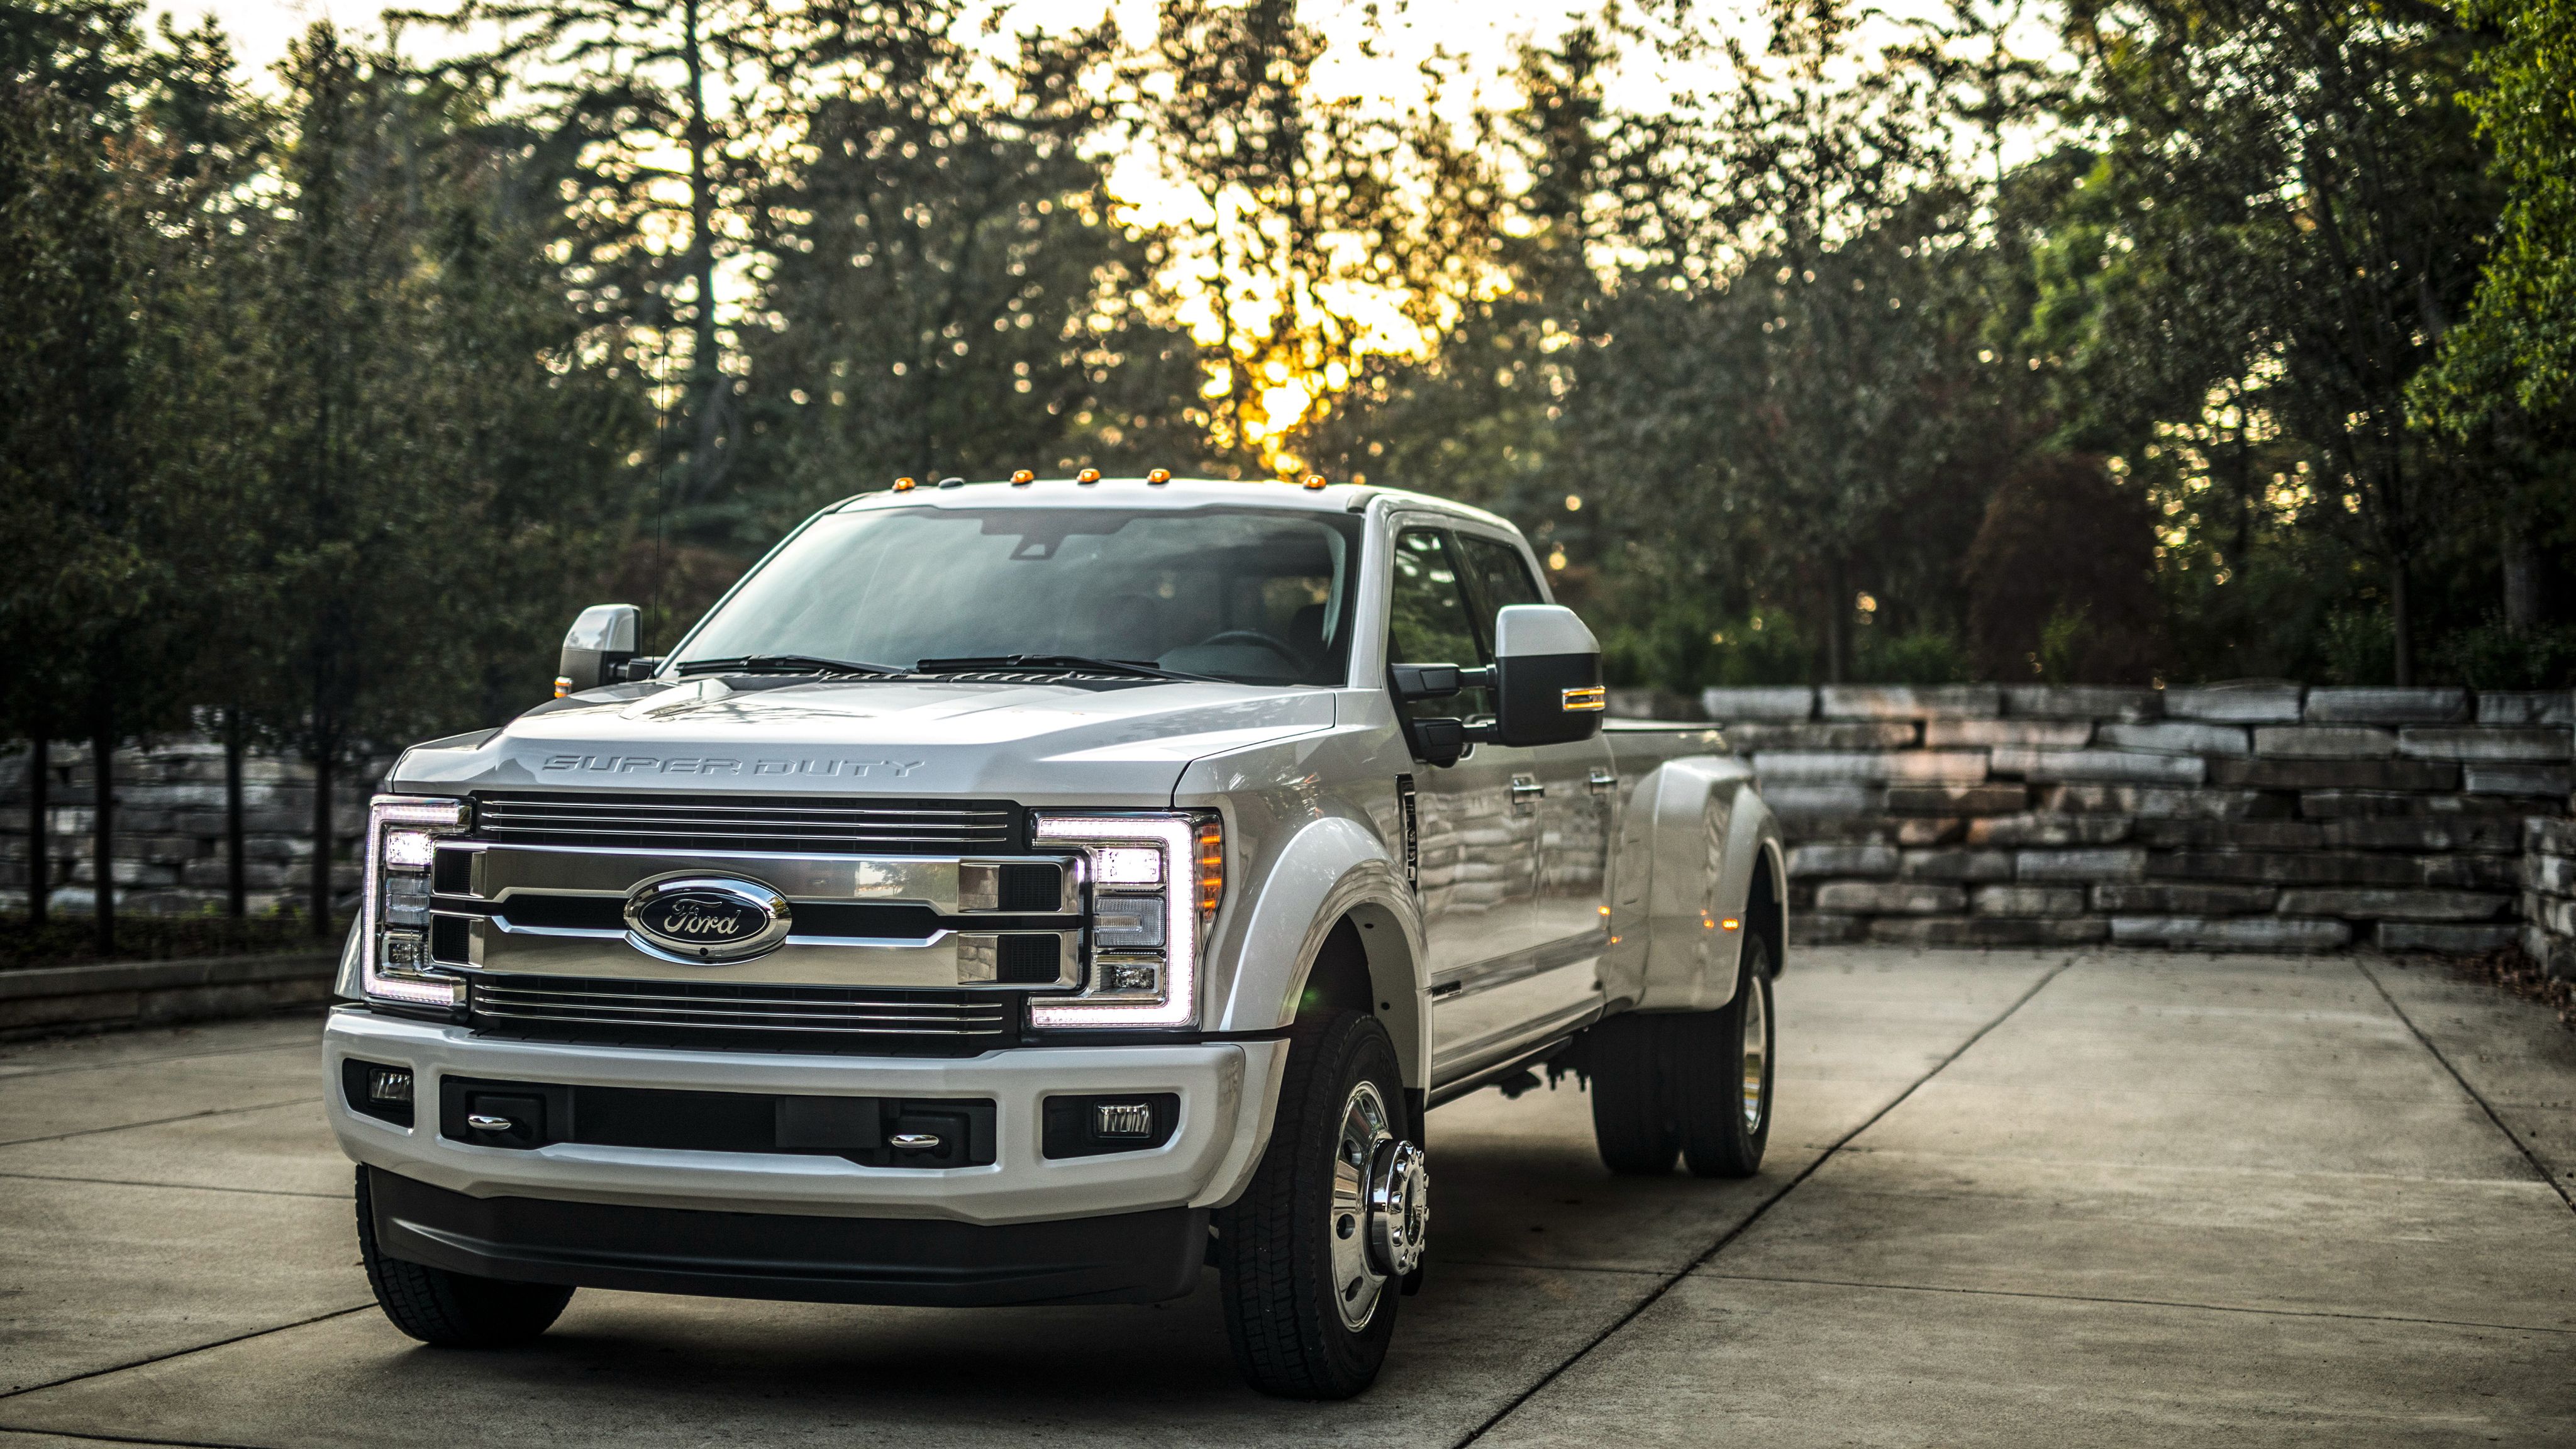 Ford Super Duty Wallpaper Free Ford Super Duty Background